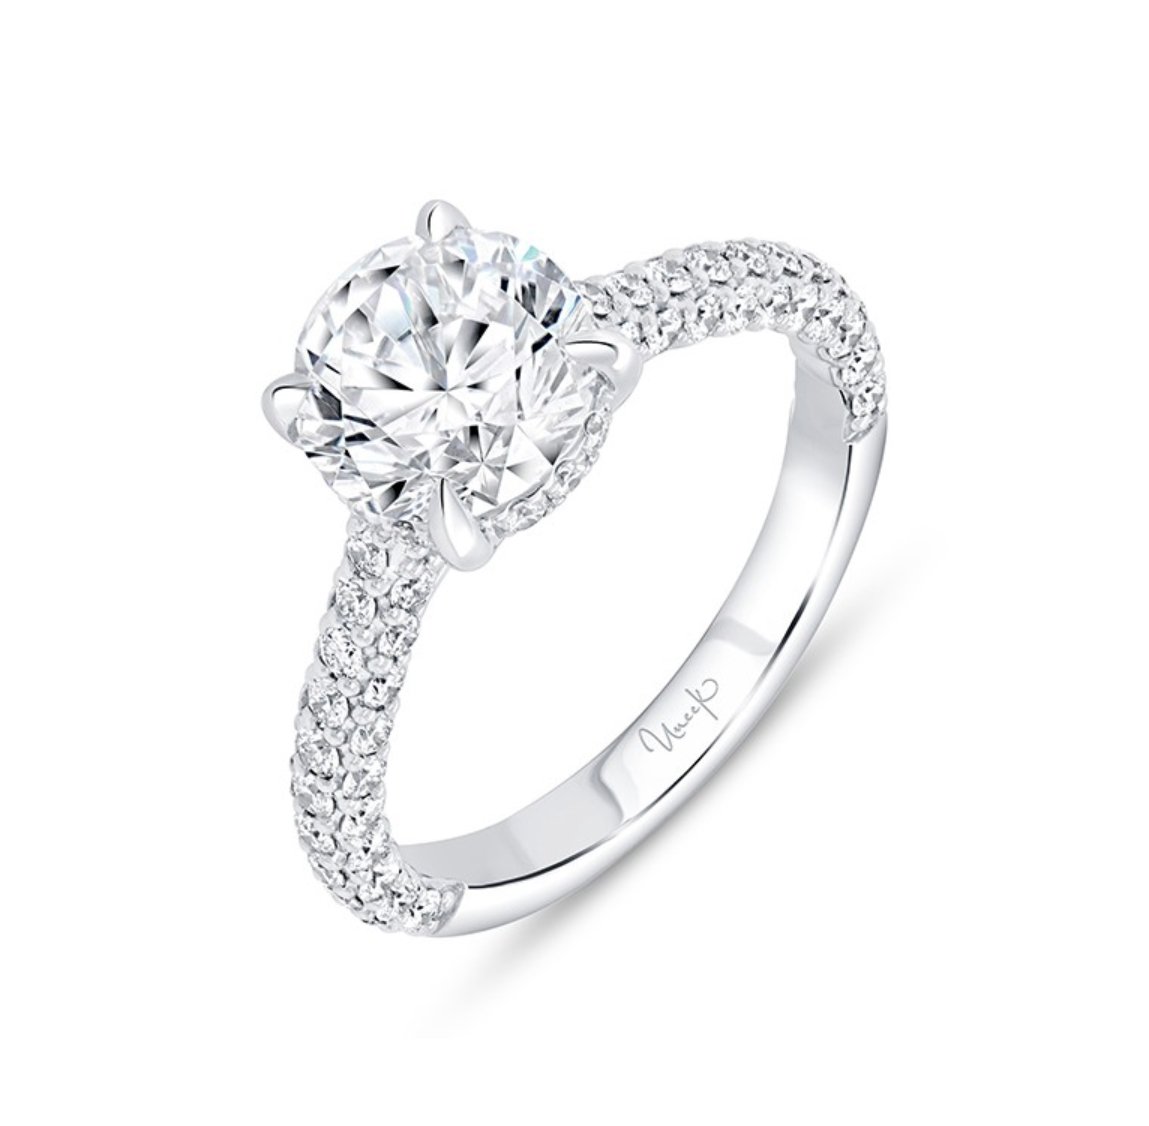 Uneek "Timeless" Round Diamond Engagement Ring in 18K White Gold